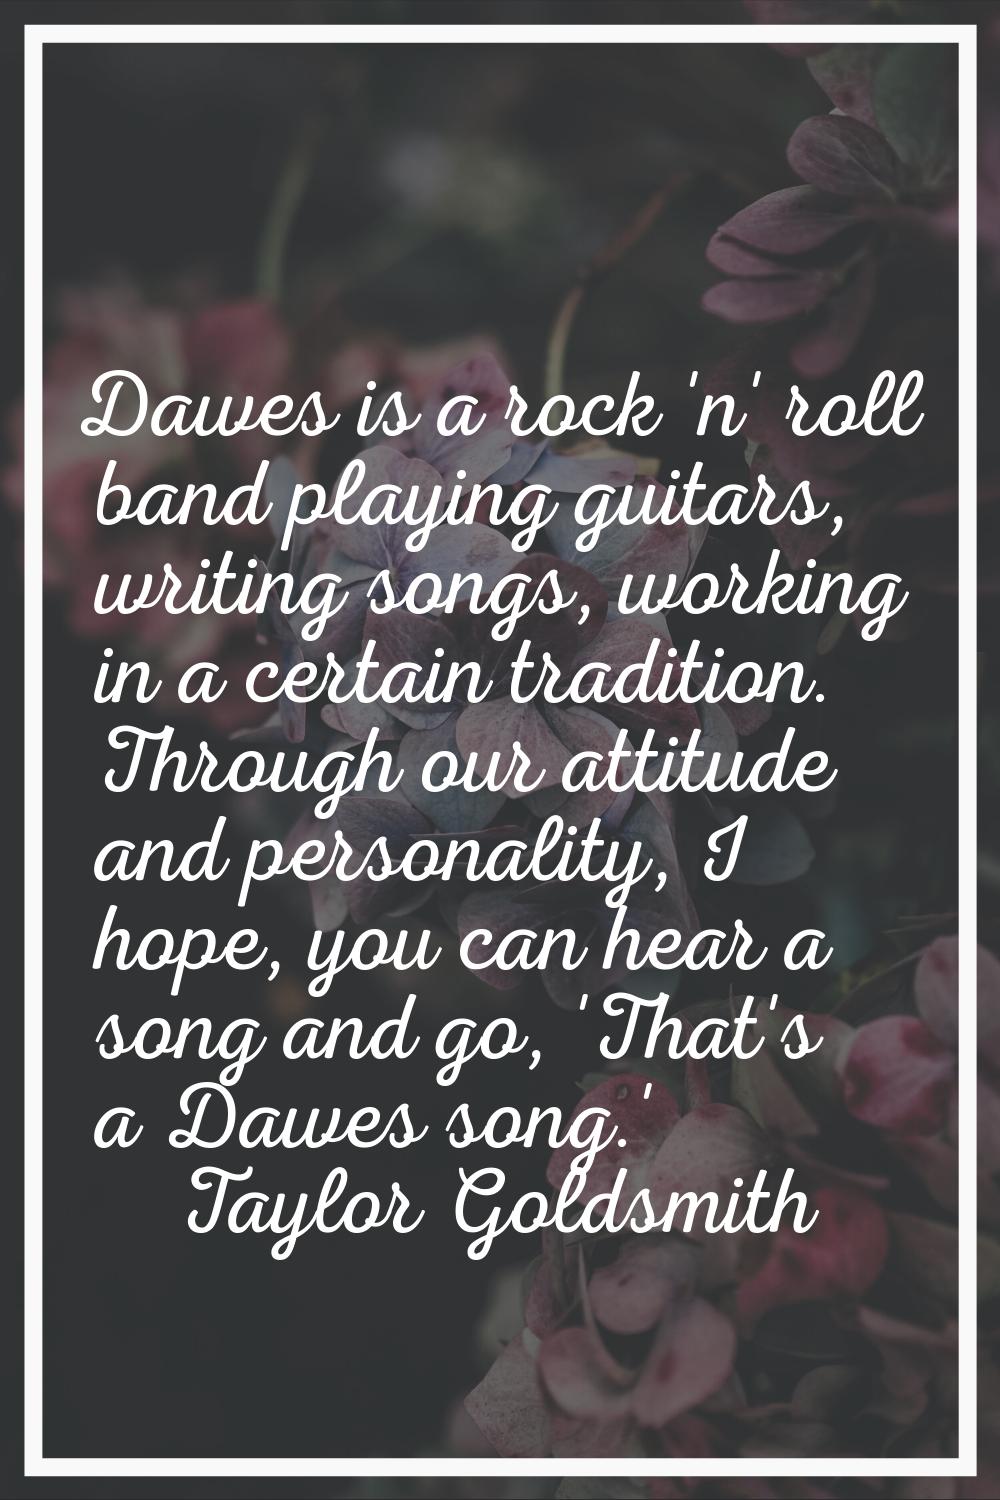 Dawes is a rock 'n' roll band playing guitars, writing songs, working in a certain tradition. Throu